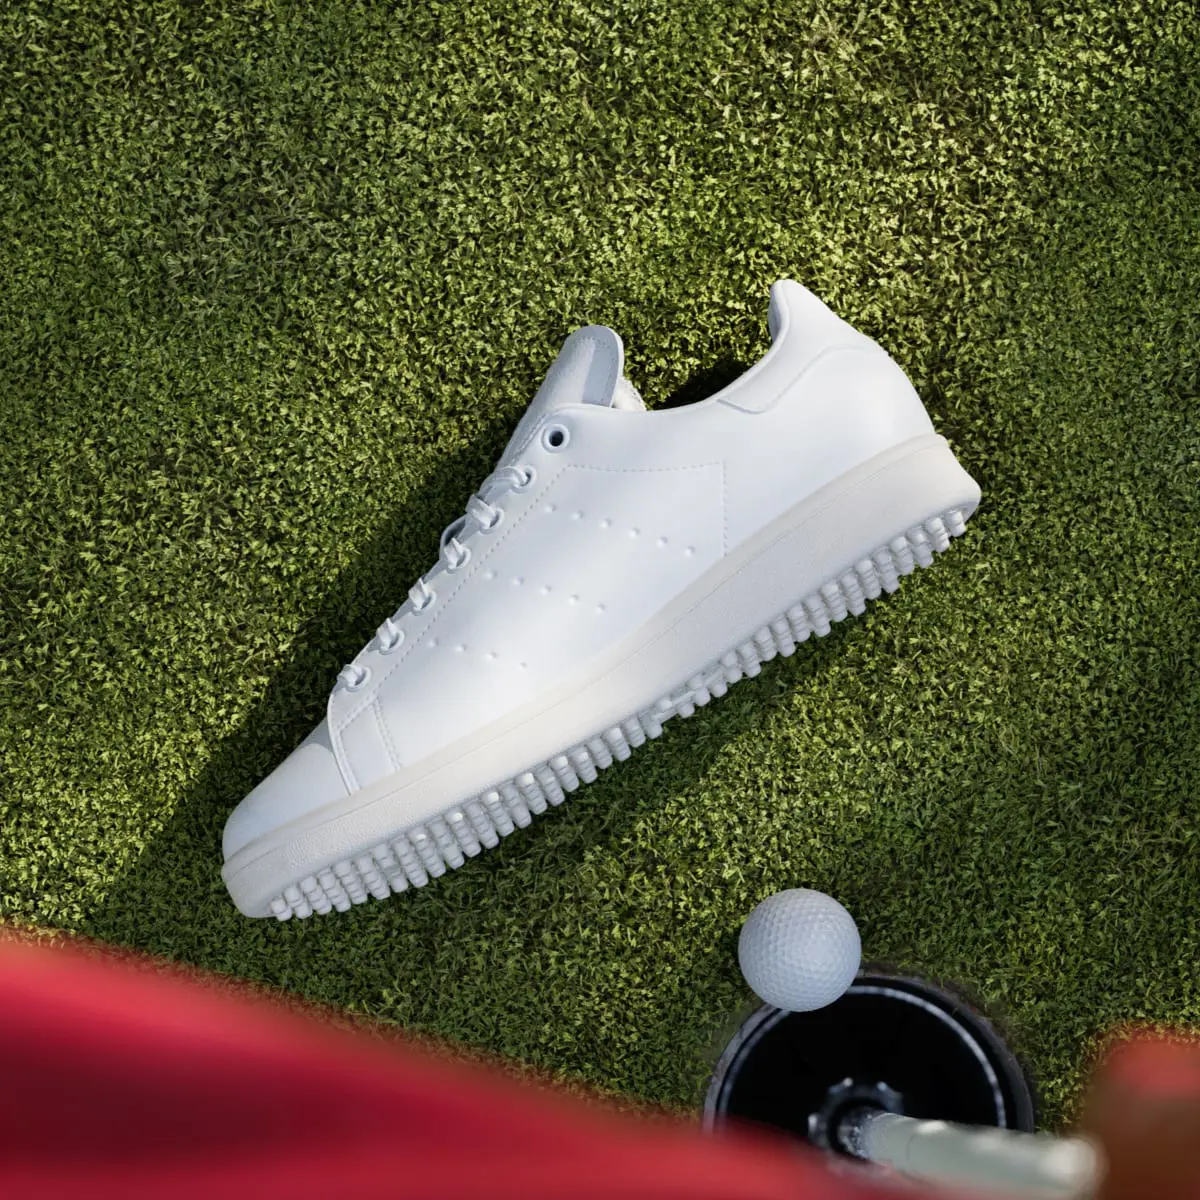 Adidas Stan Smith Golf Shoes. 2